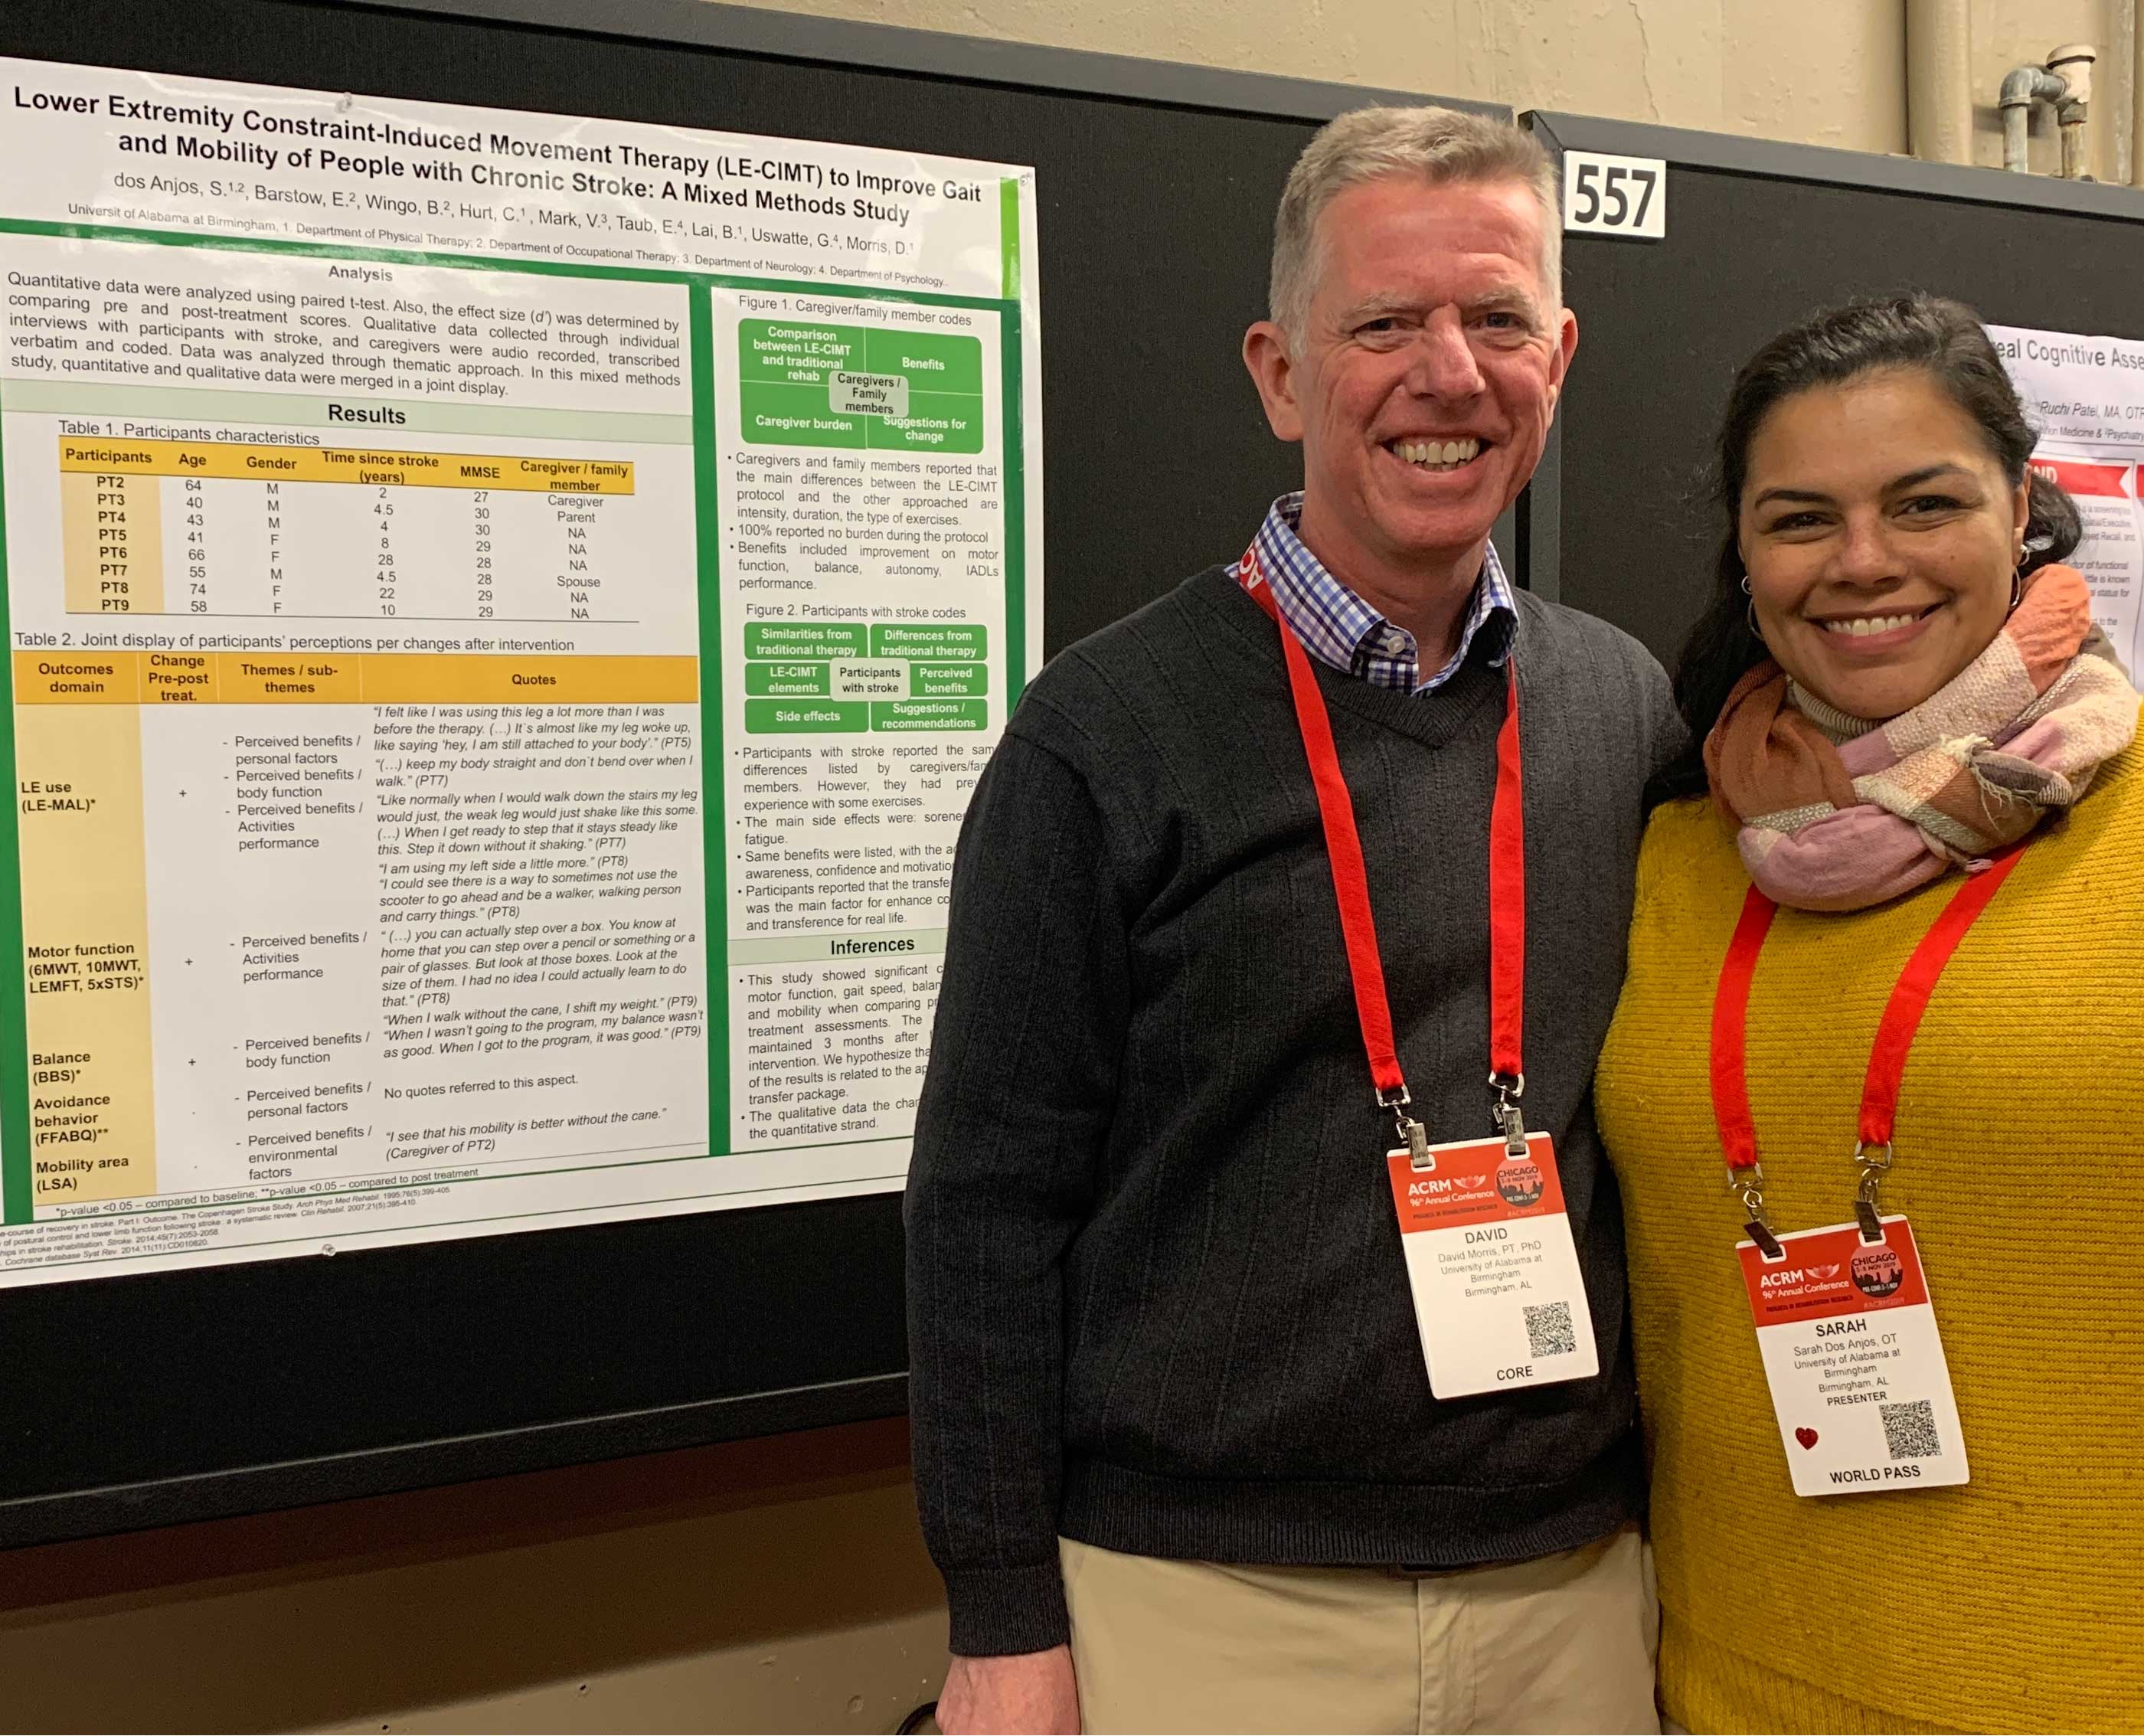 Dr. dos Anjos and Dr. Morris present some of their CIMT research at an American Congress of Rehabilitation Medicine annual conference.